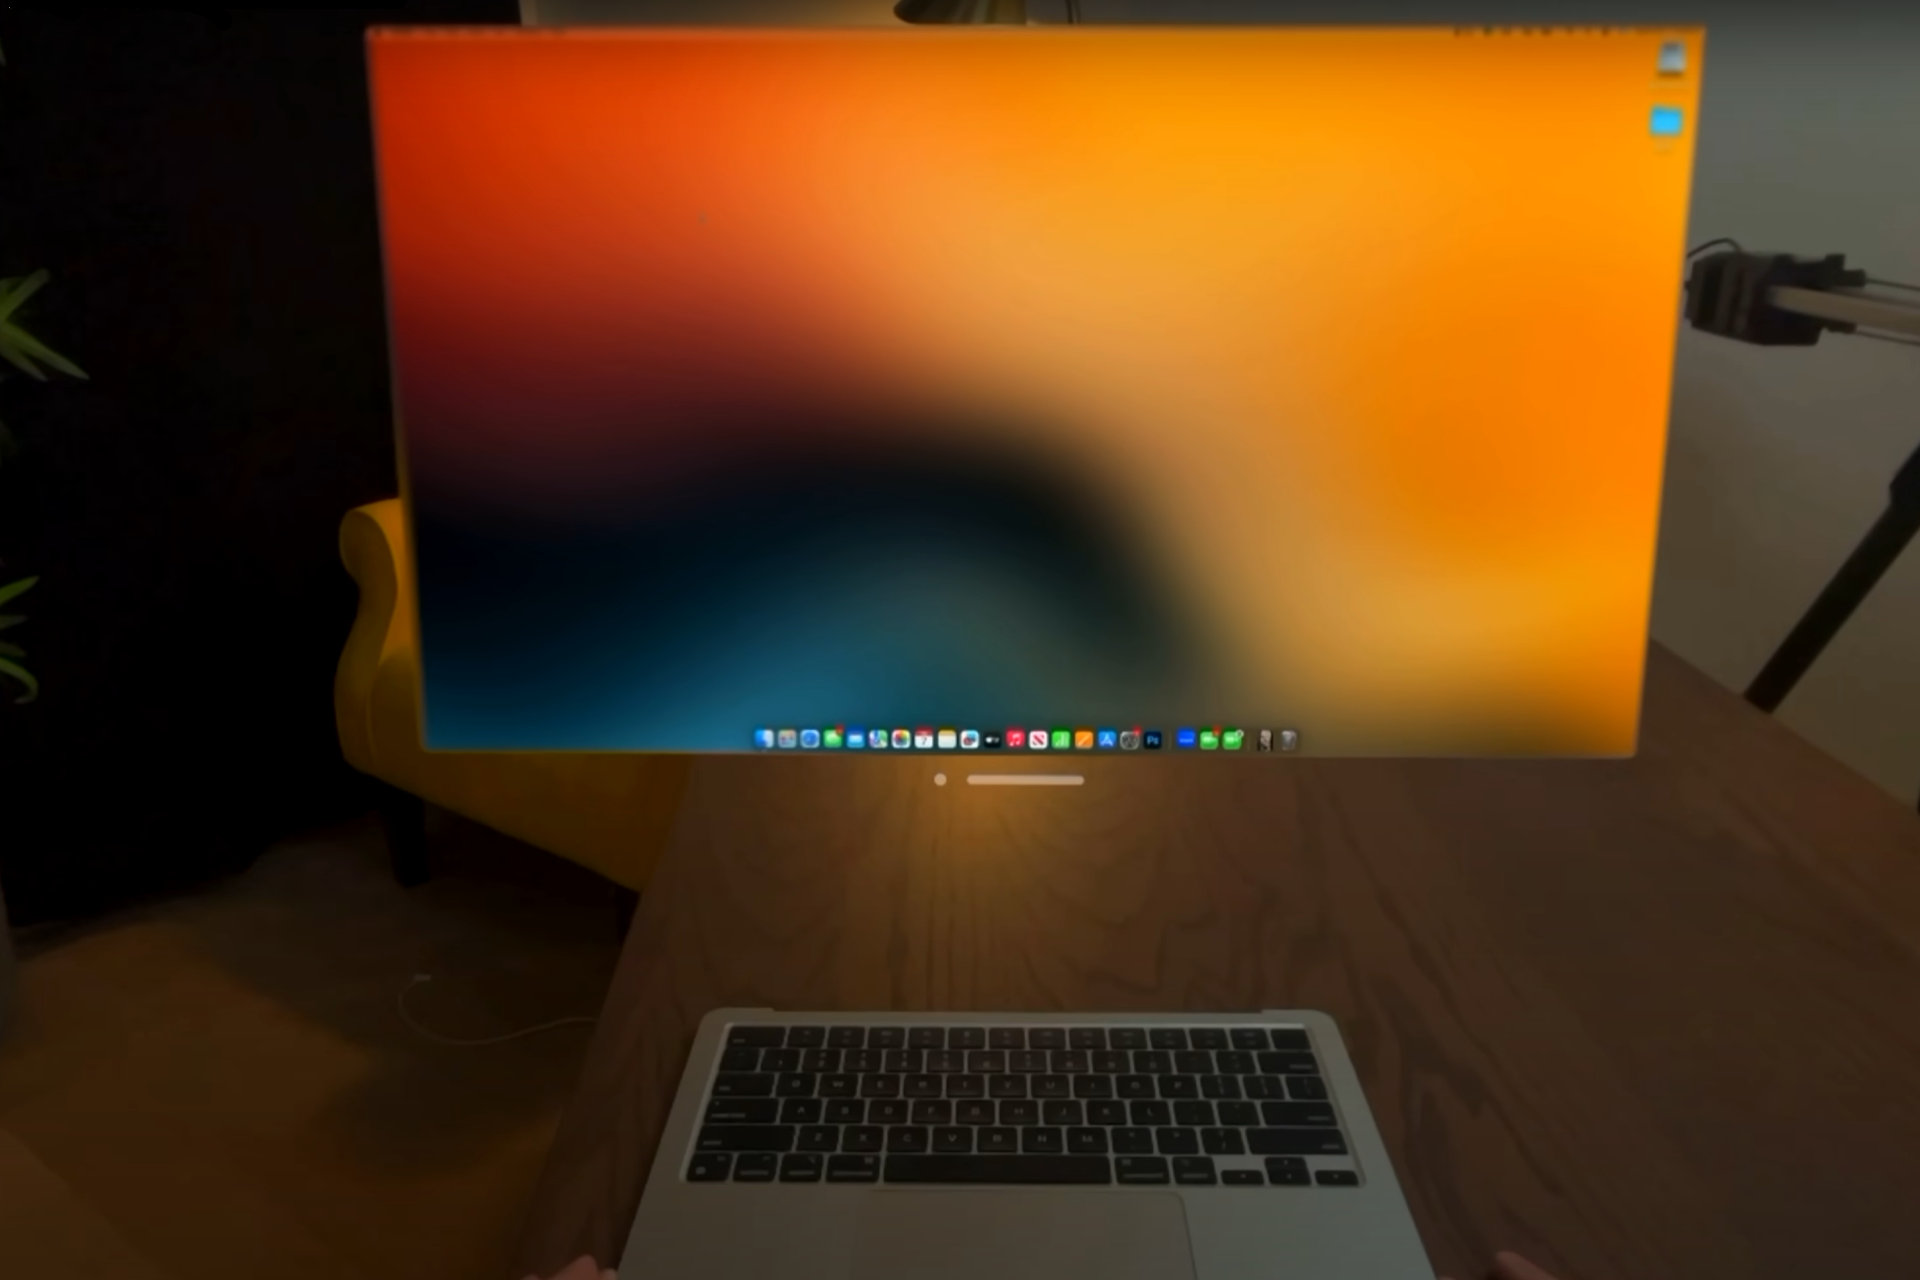 Of course, the Vision Pro can make a Mac virtual display much larger.